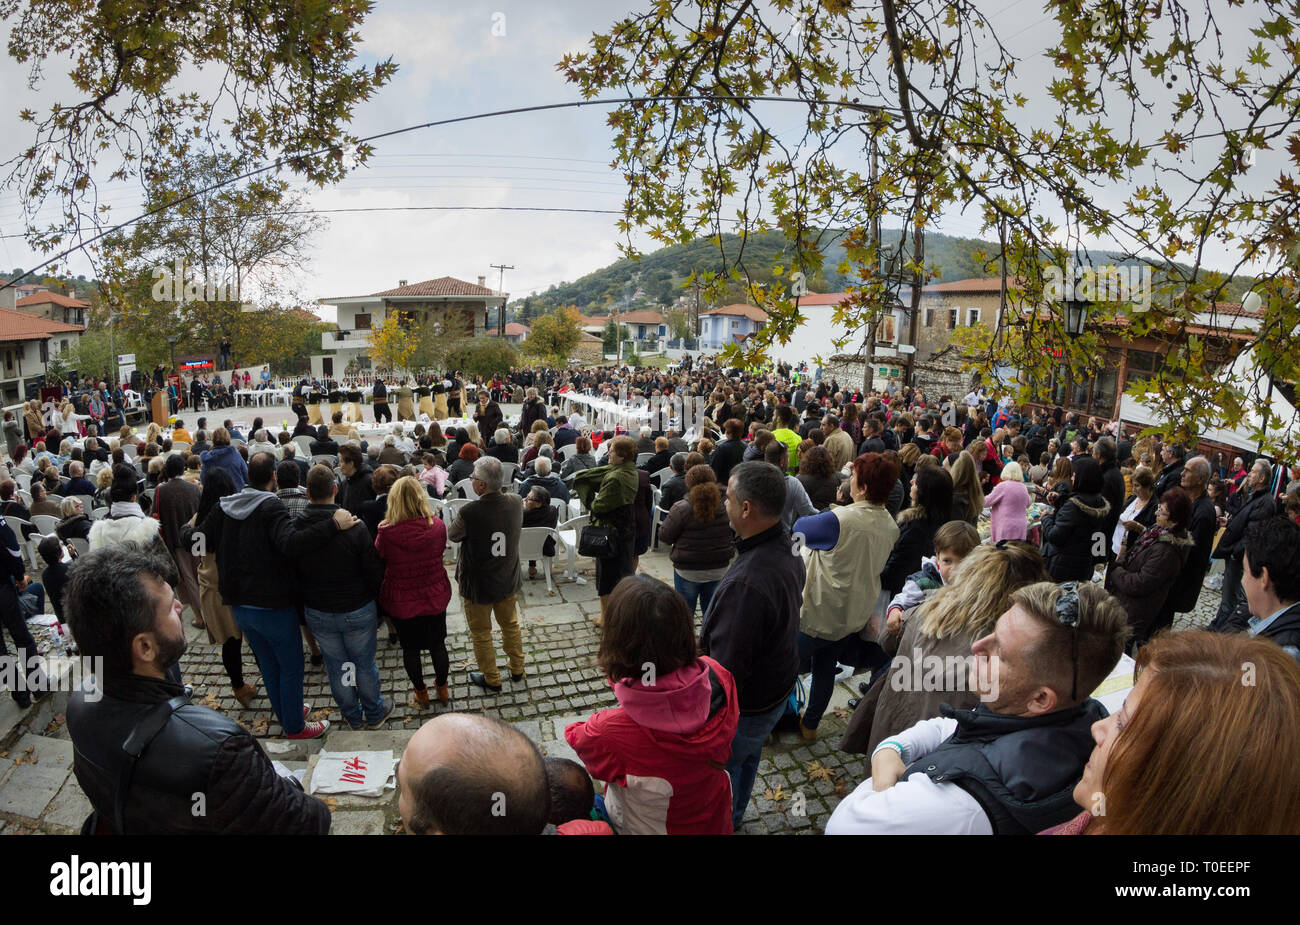 Crowds attending Livadi's annual chestnut roasting festival and the folk dance groups performing live seen afar. Livadi,Thessaloniki, Thessaly, Greece Stock Photo